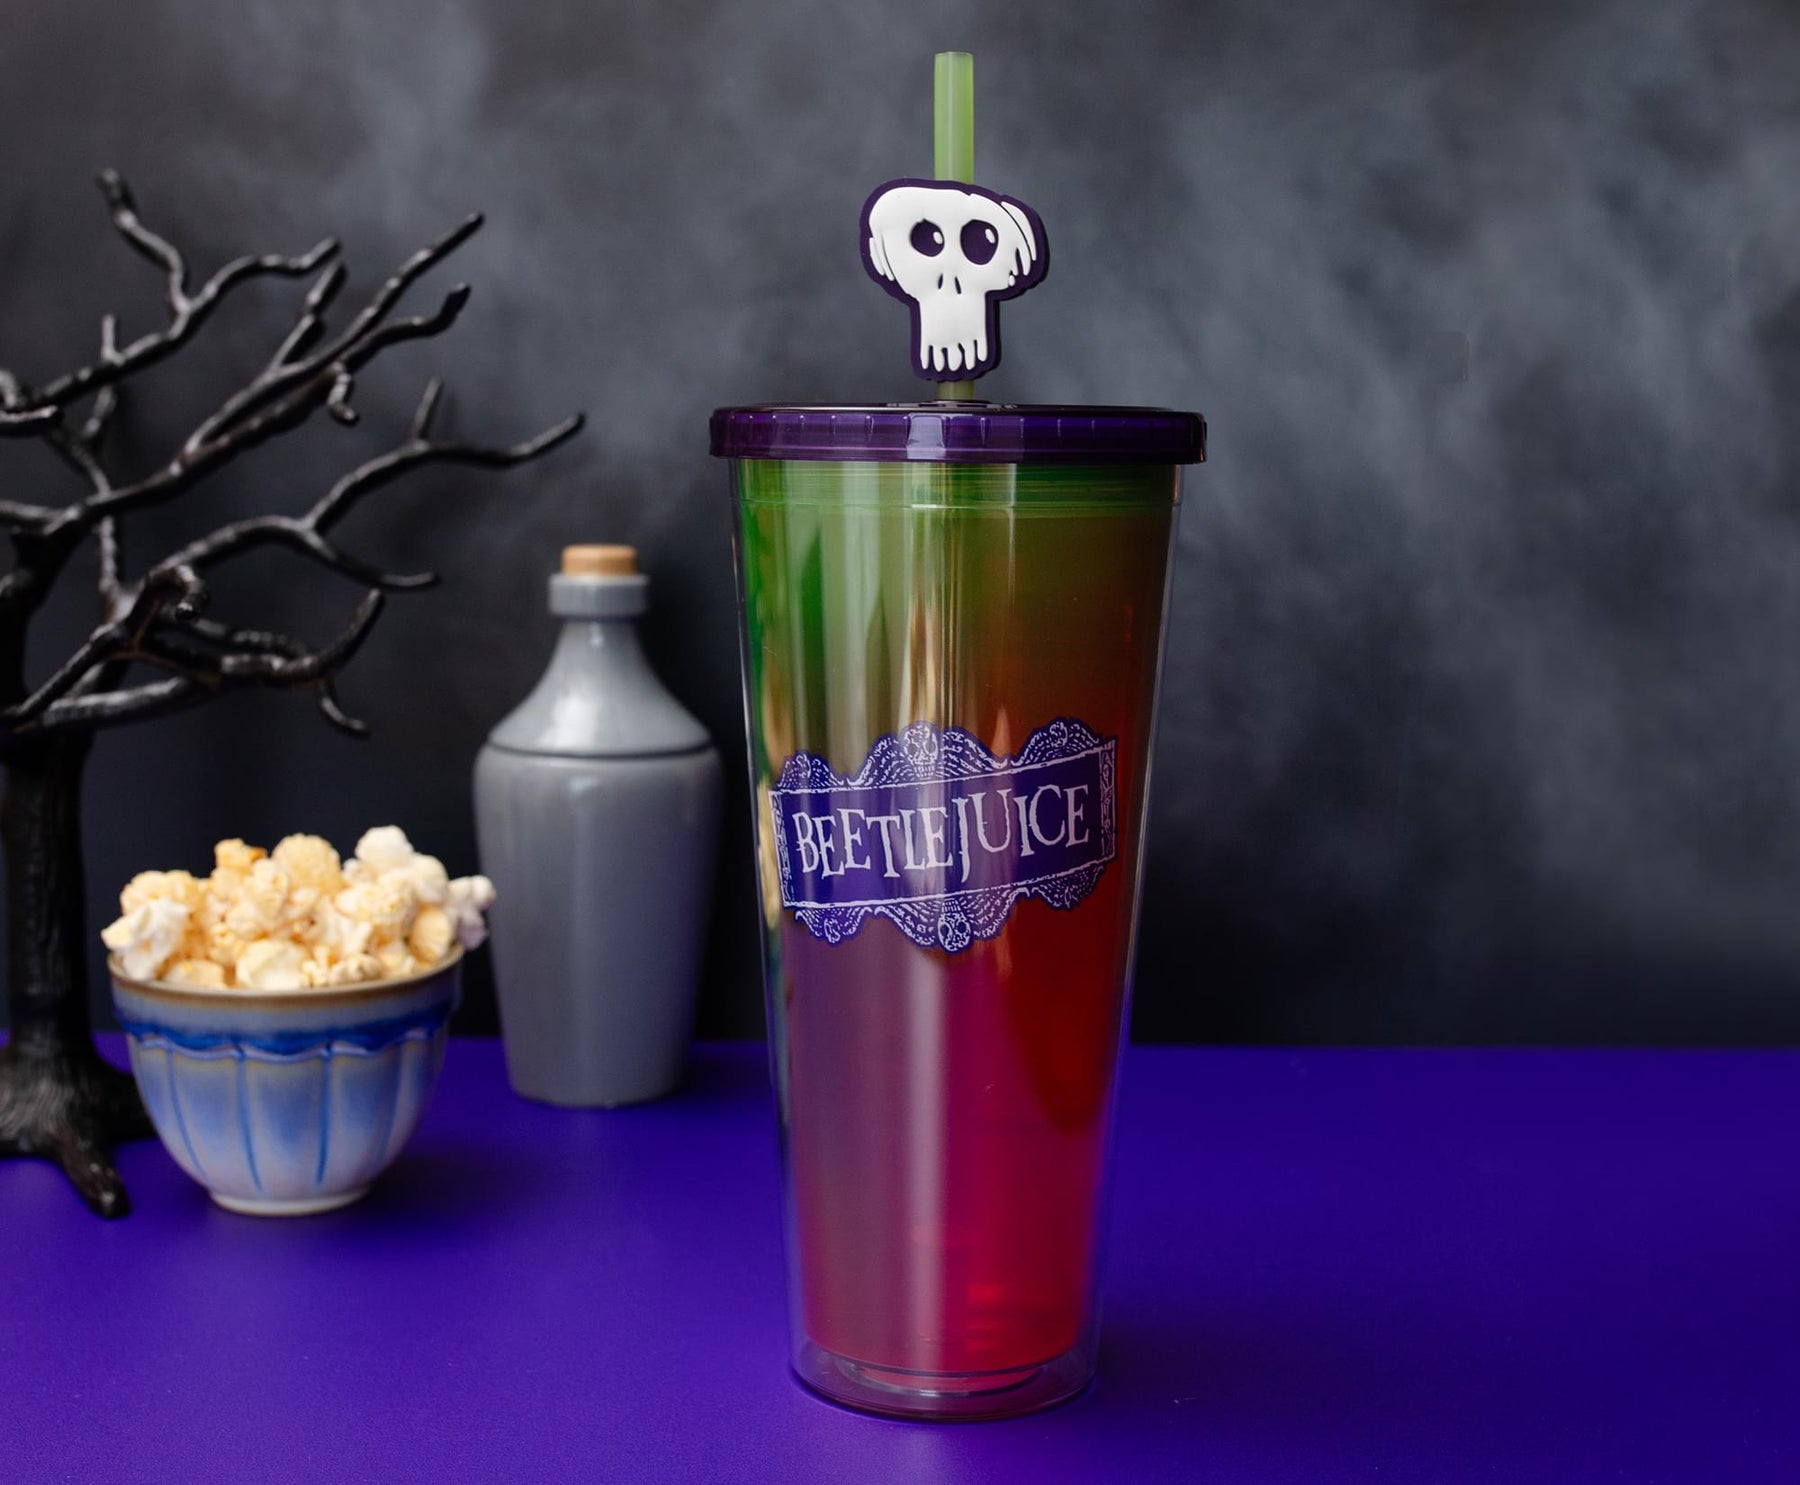 Beetlejuice Strange and Unusual Carnival Cup with Lid and Straw Topper